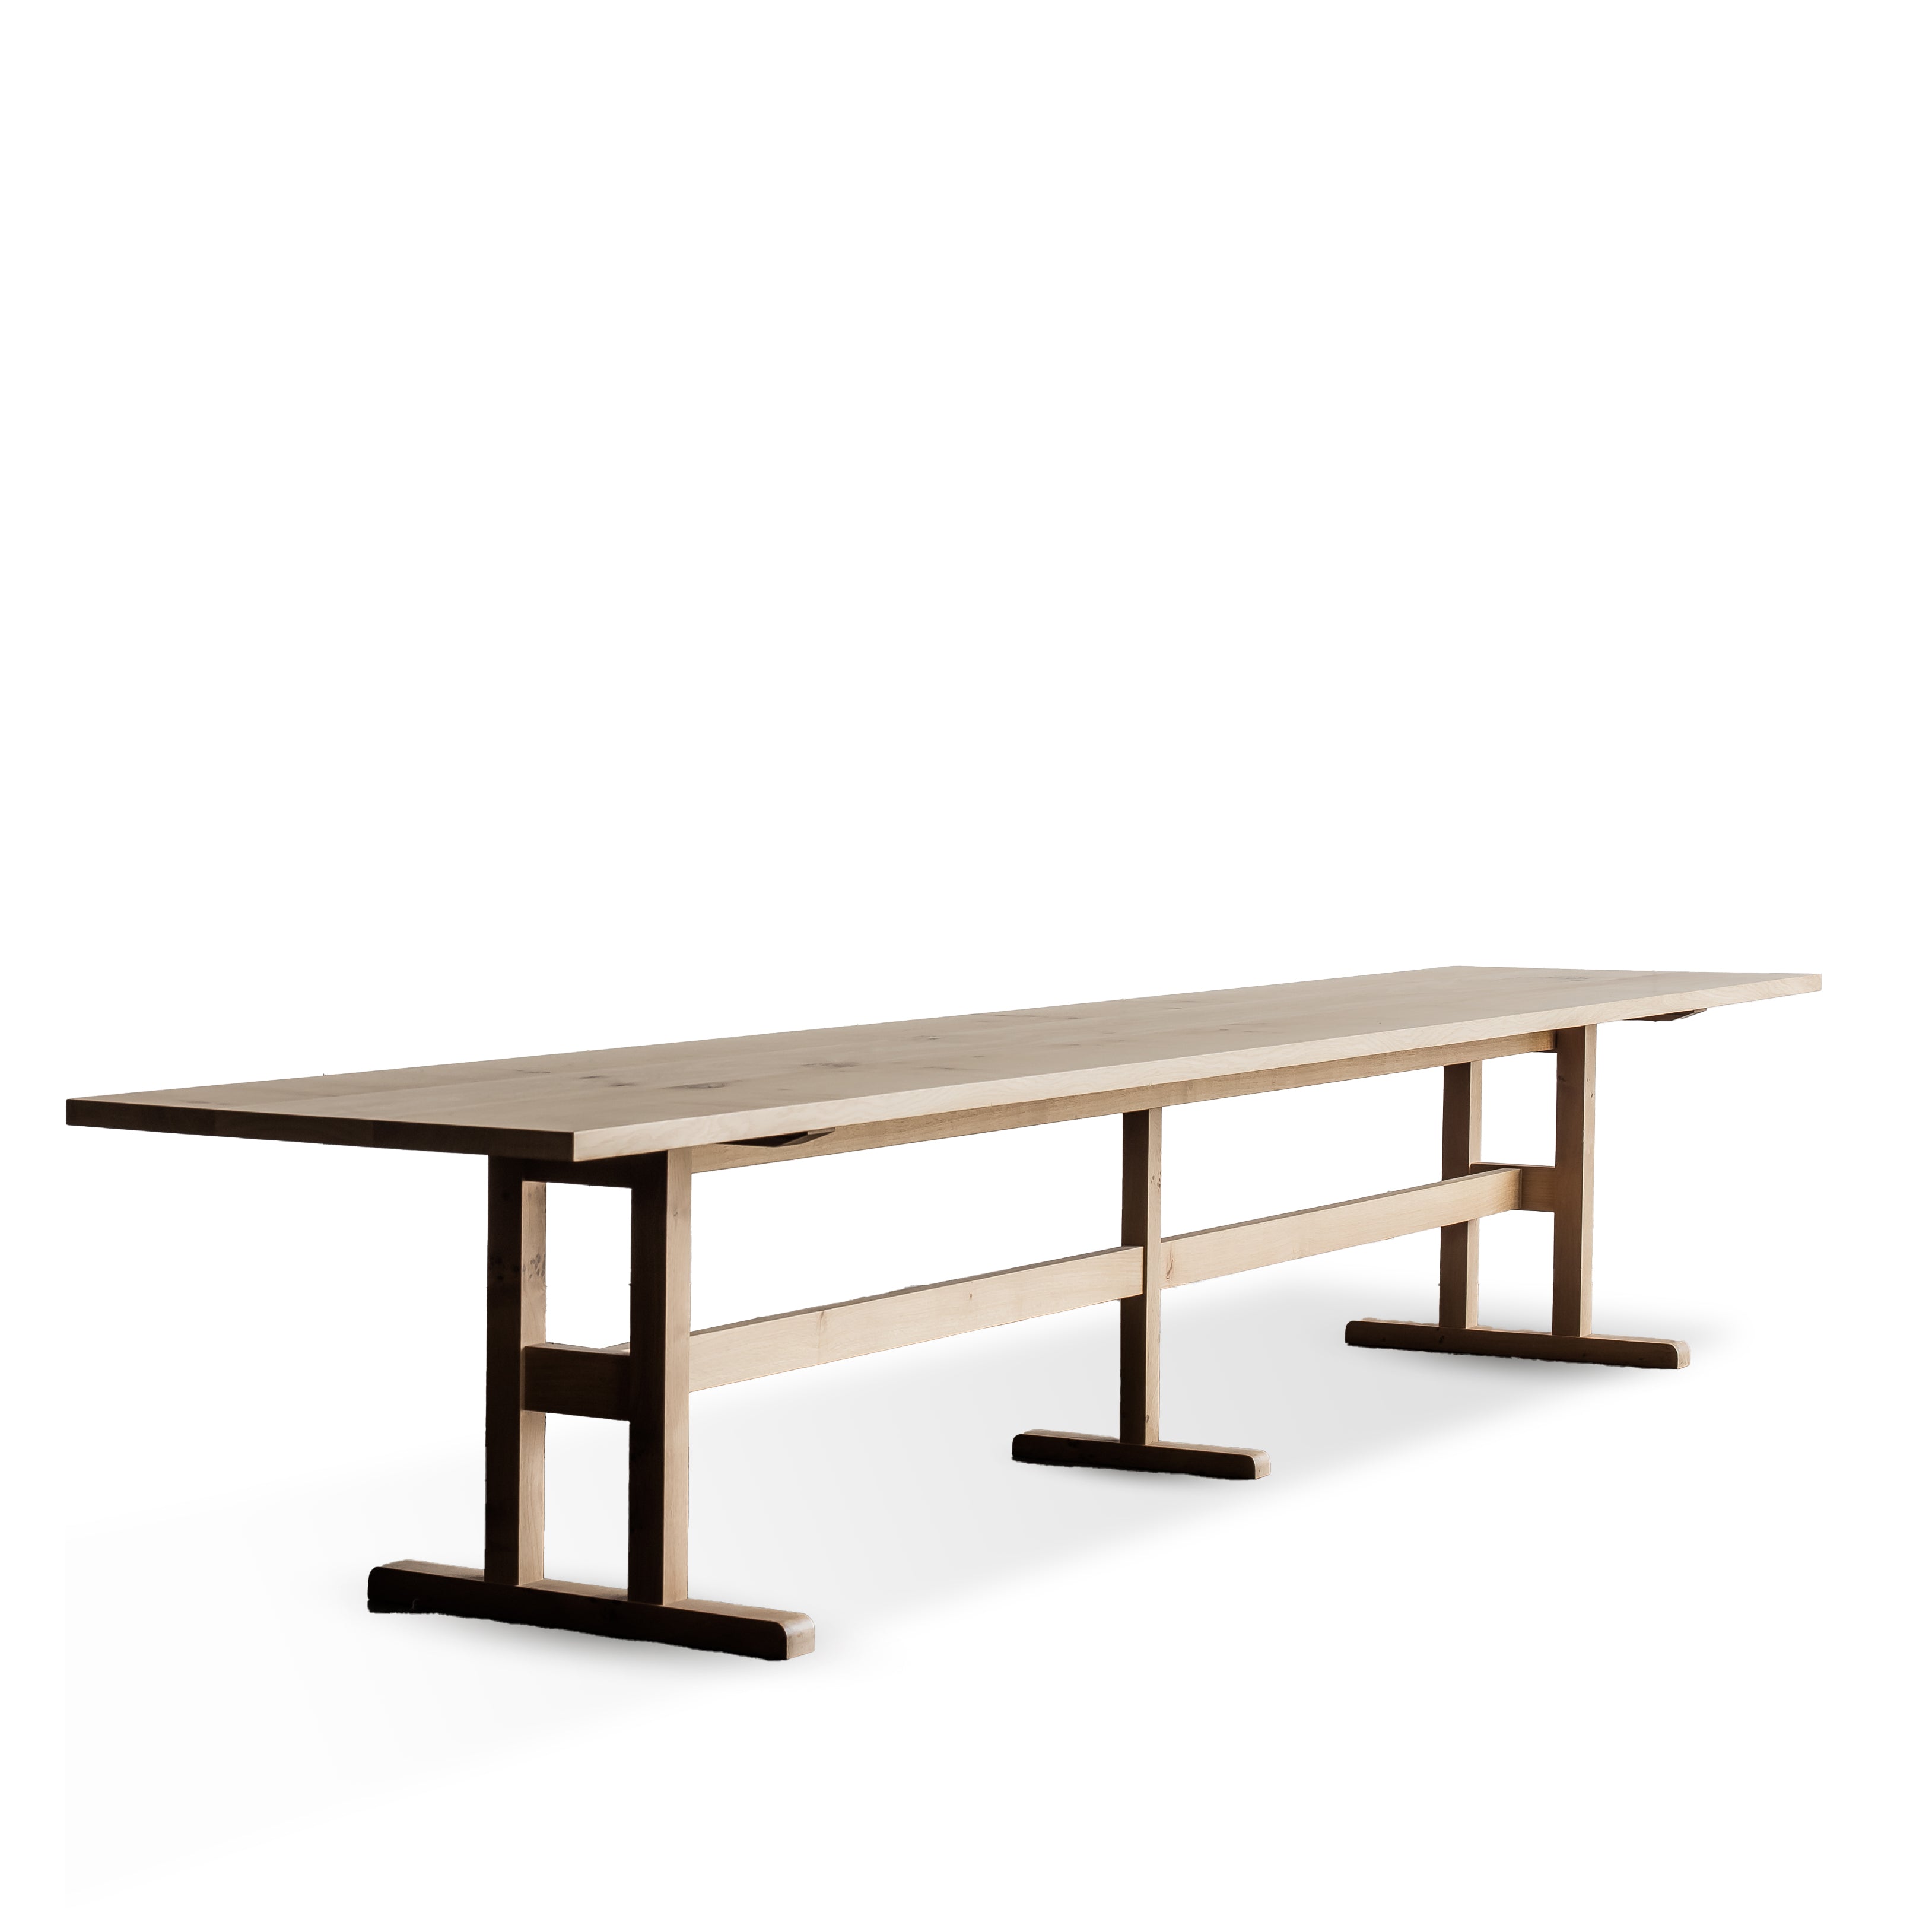 TRAPPIST dining table